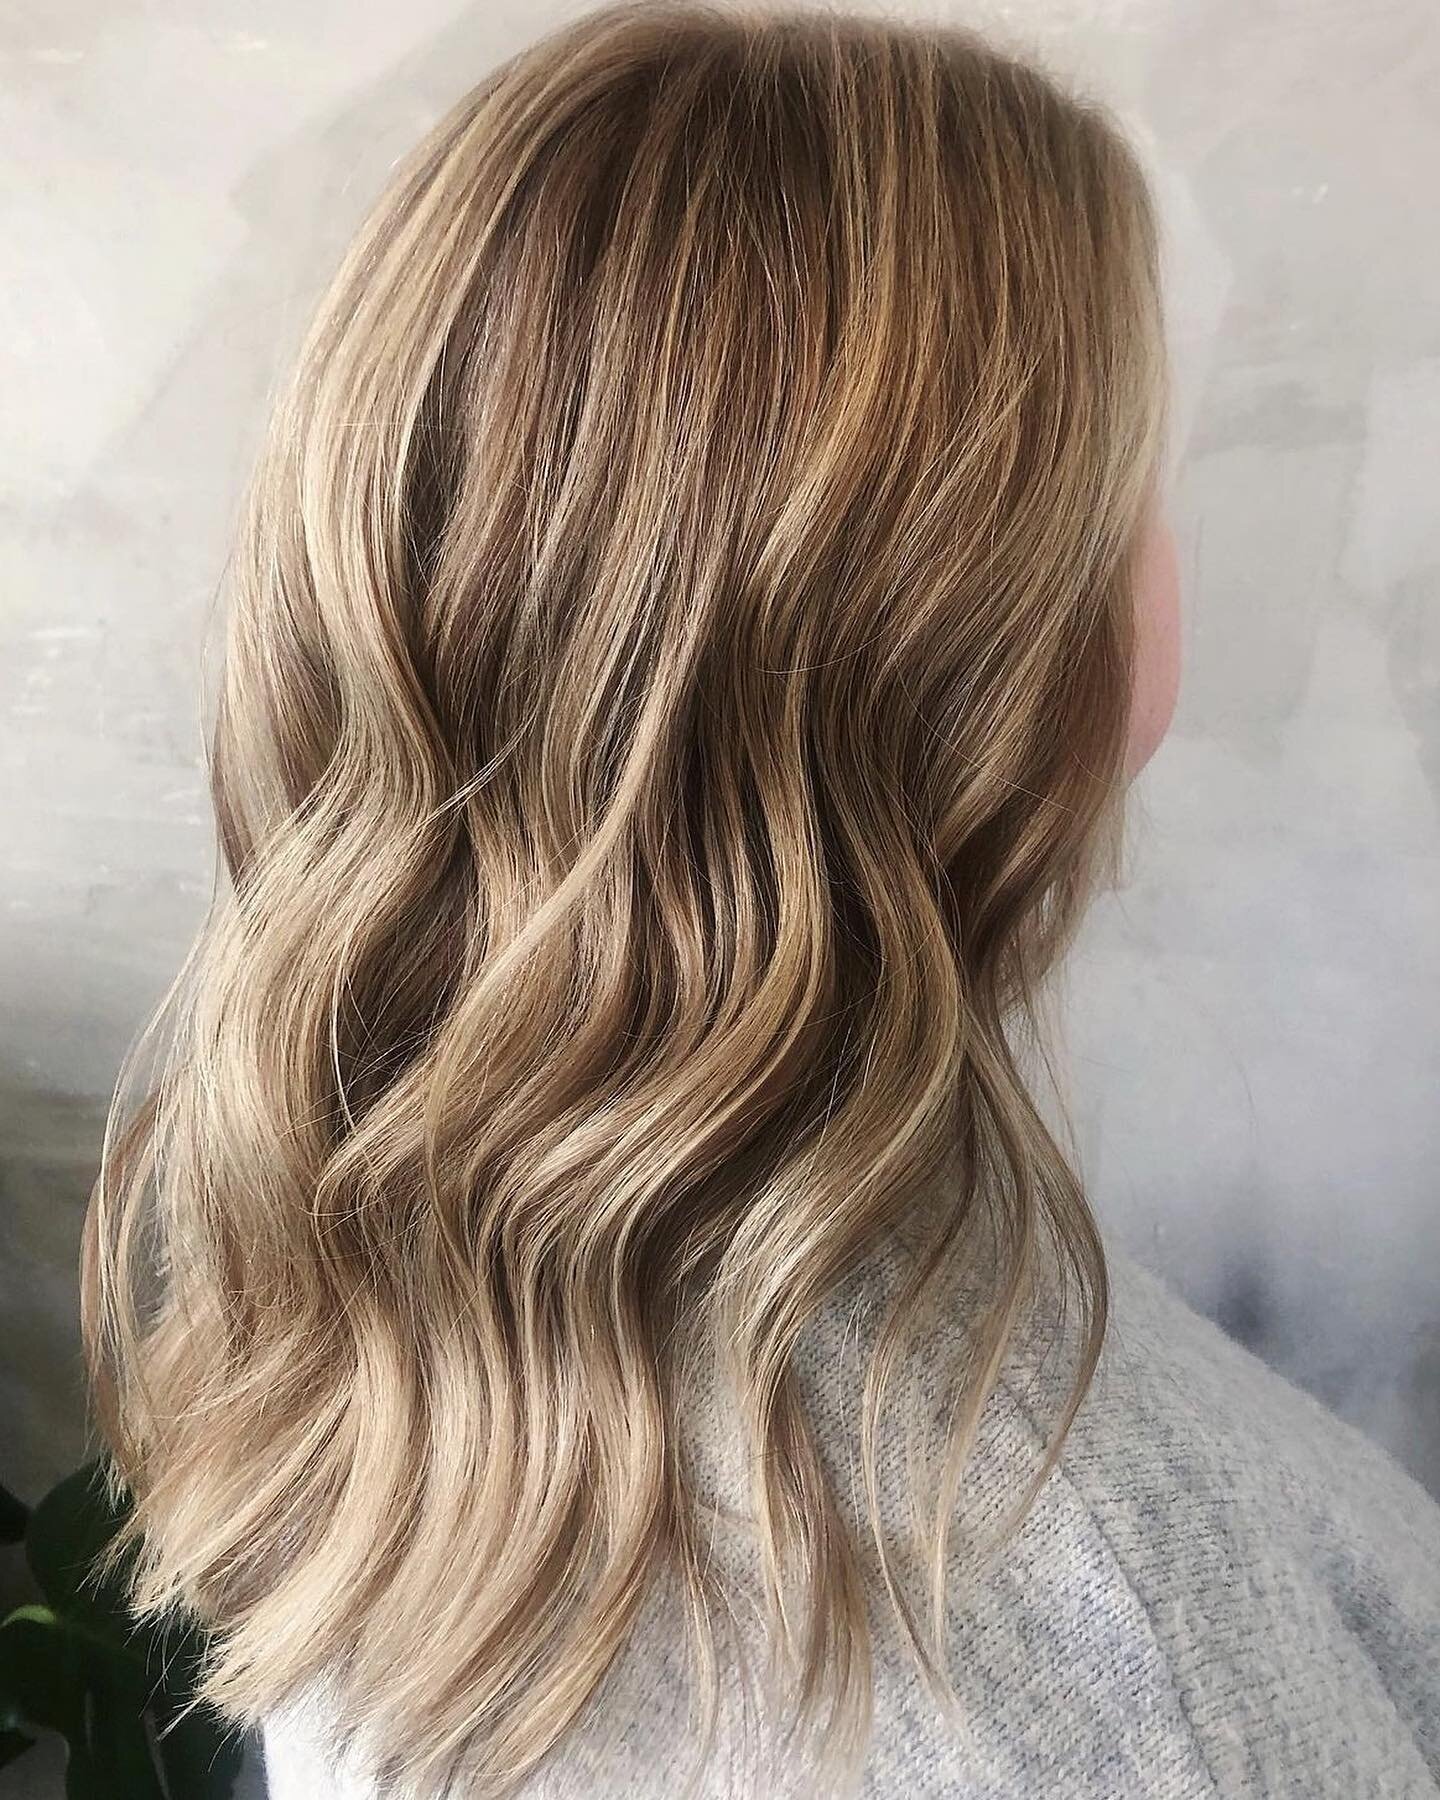 Super soft angel blonde 😇 by @sarah.s.hair she did some foilyage and lowlights to create that beautiful dimension! 🤩